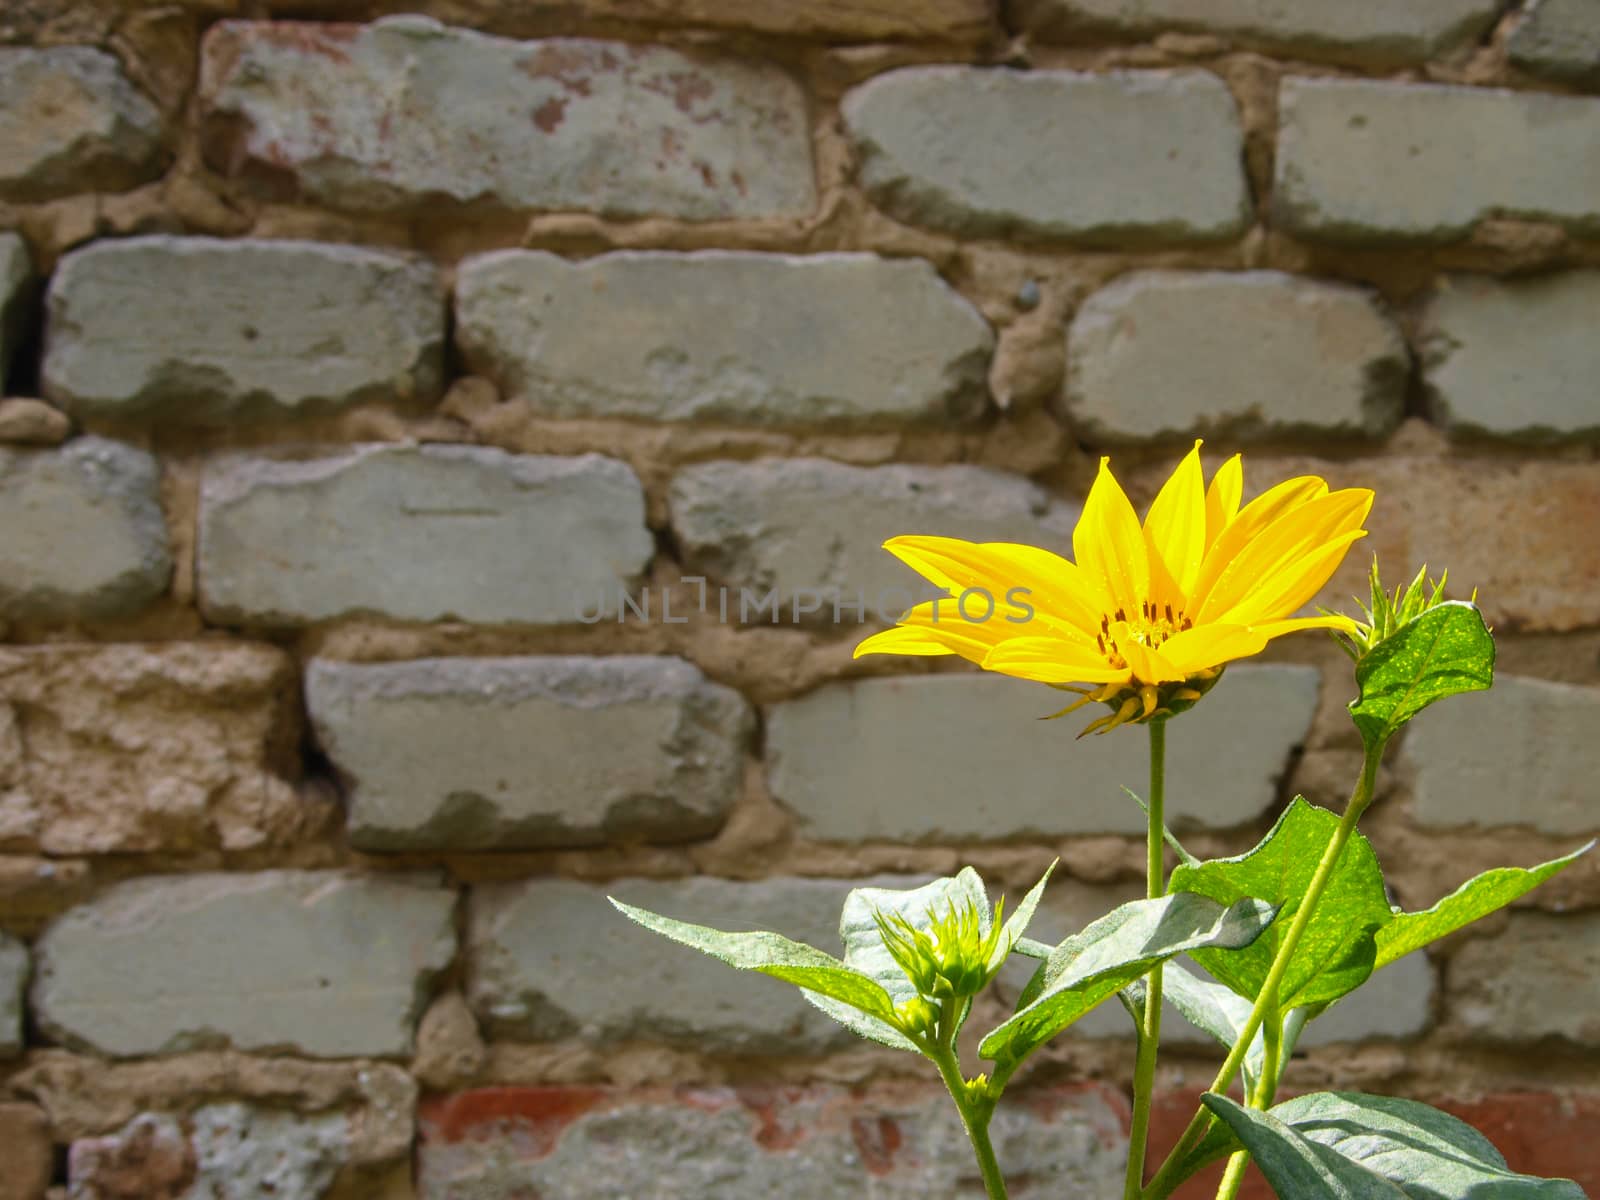 False Sunflower with old brick wall. by GraffiTimi